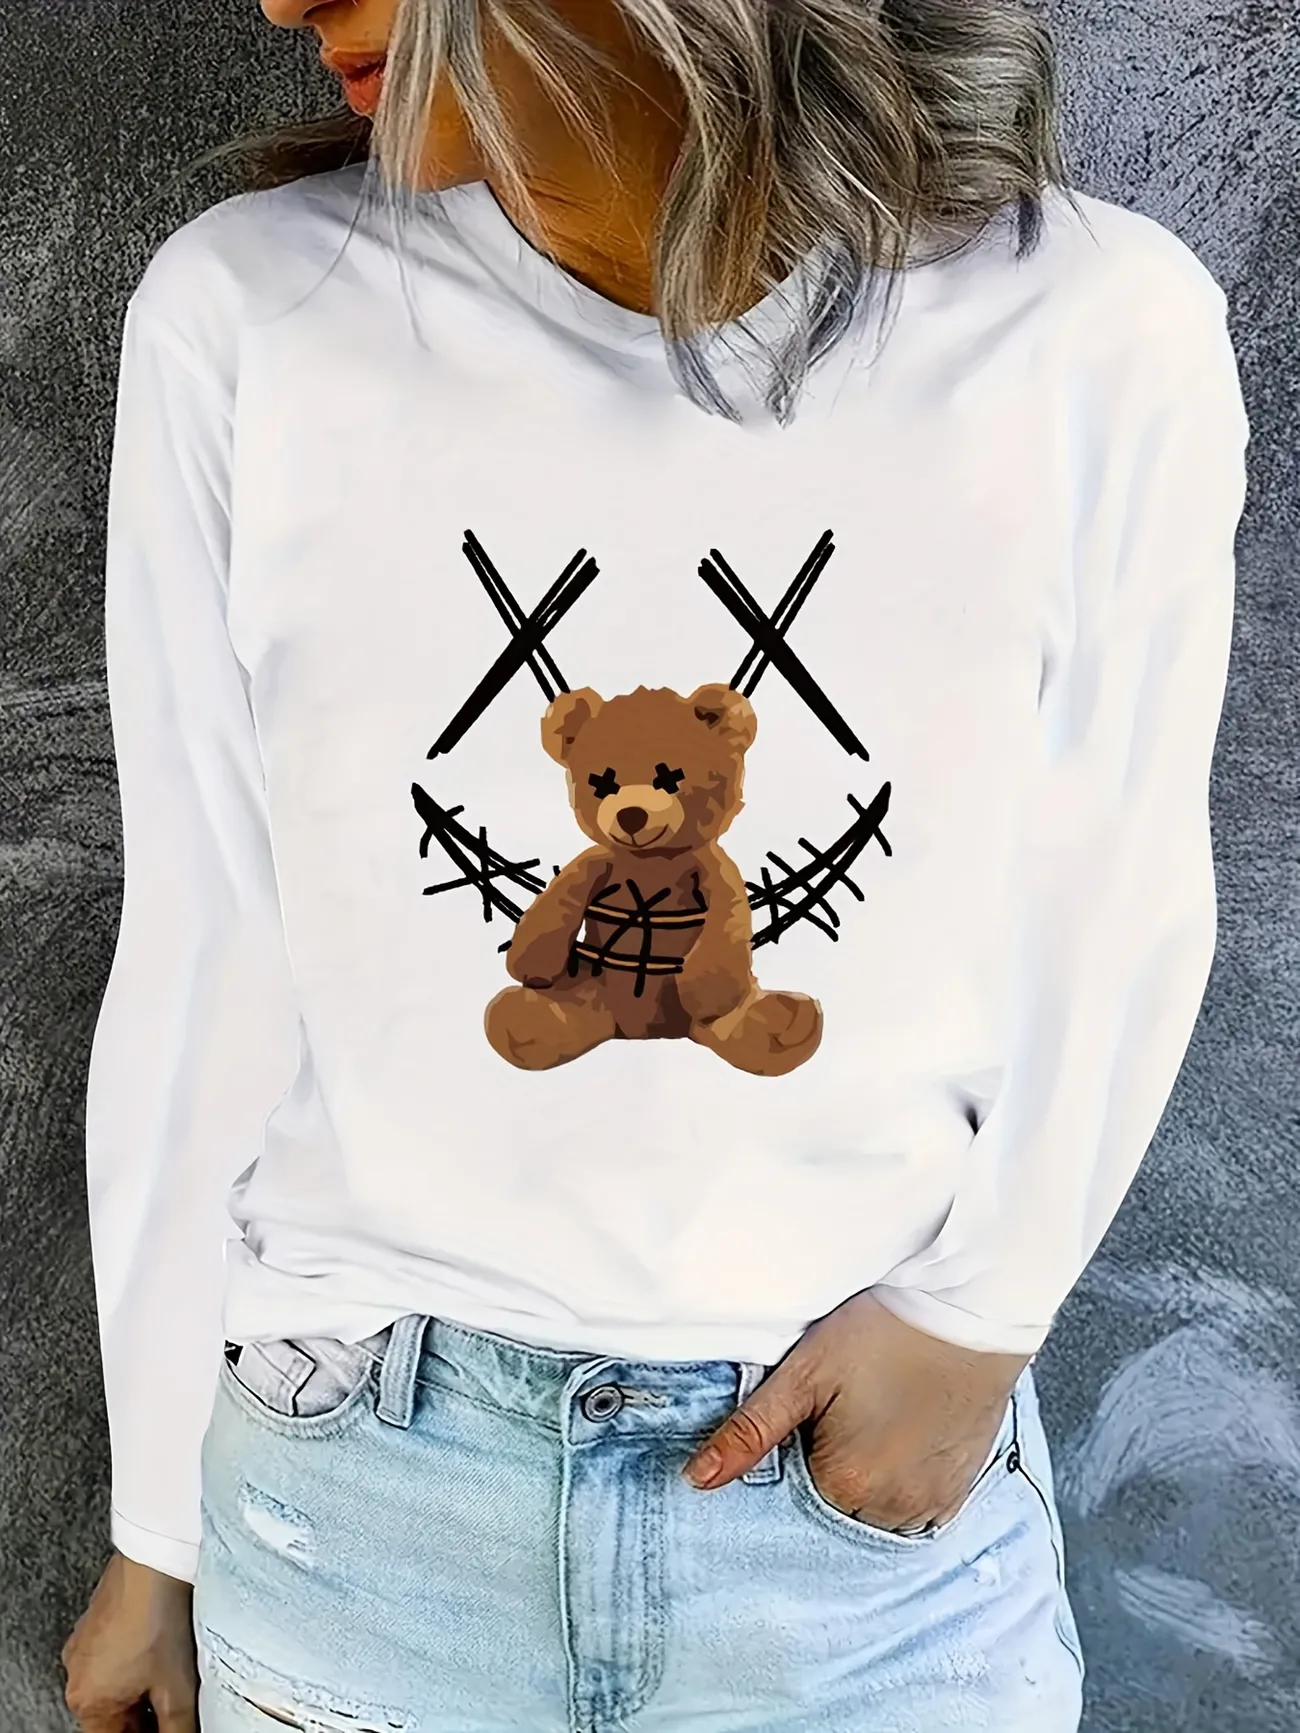 Teddy Bear Print T Shirt Long Sleeve Casual Top For Spring Fall Womens  Clothing, Check Out Today's Deals Now